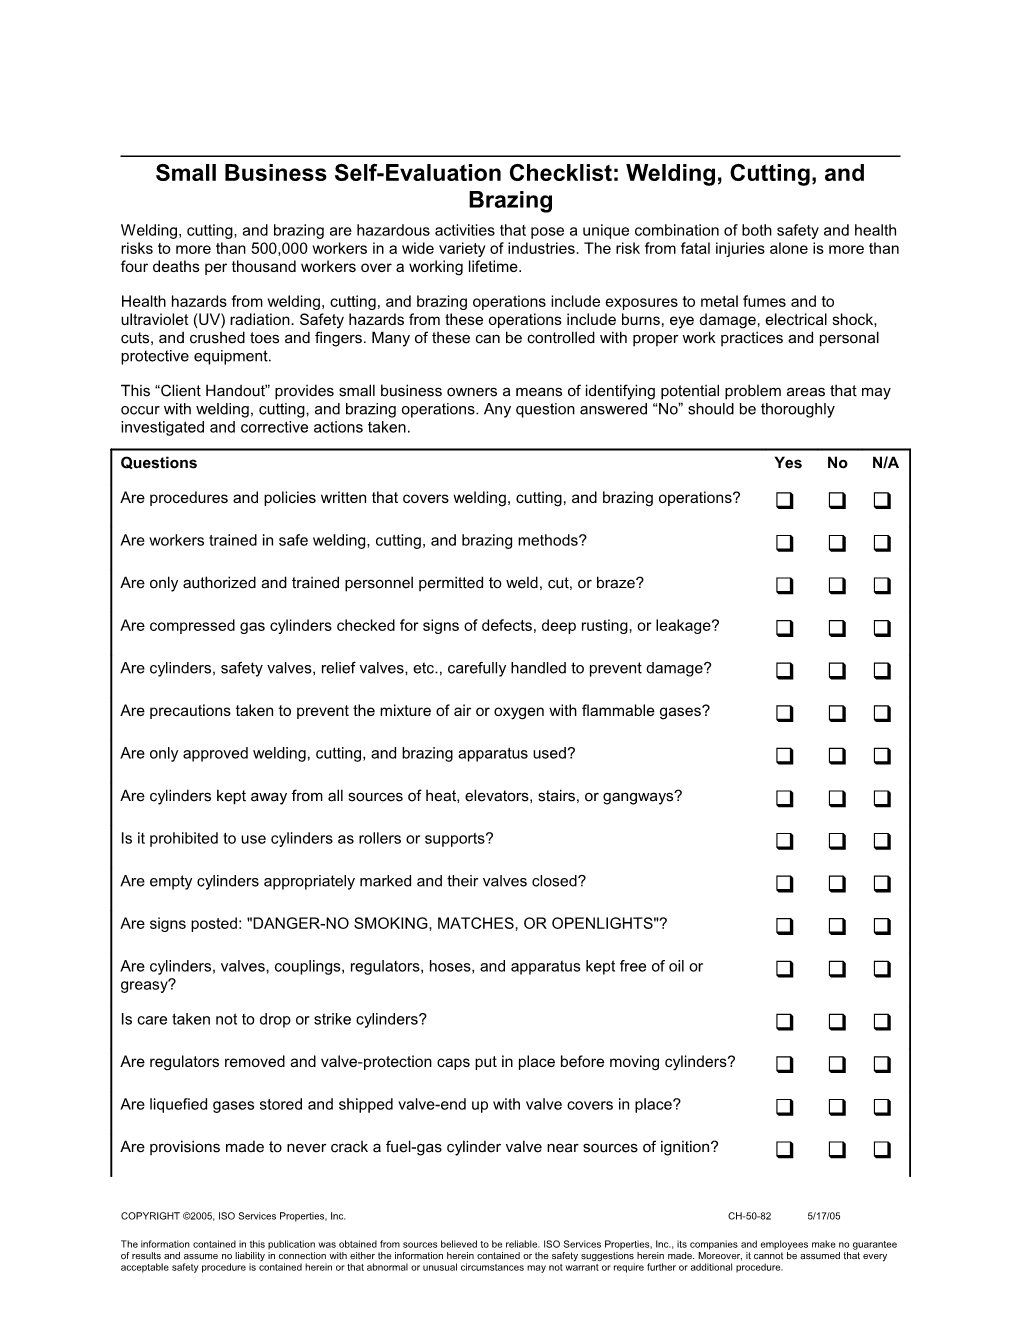 Small Business Self-Evaluation Checklist: Welding, Cutting, and Brazing